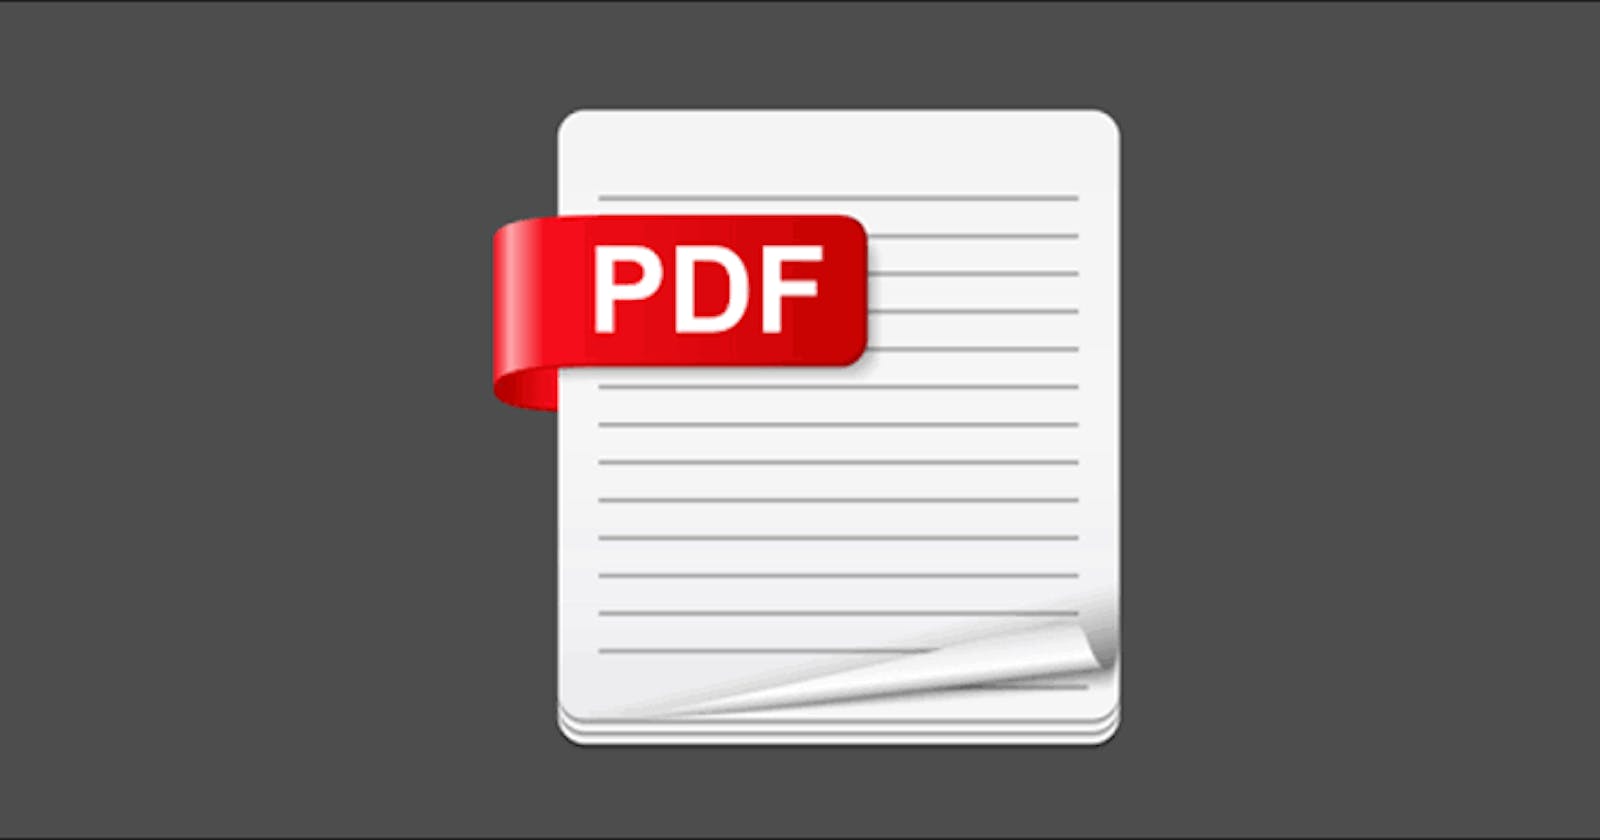 Some awesome javascript libraries for viewing pdfs in the browser